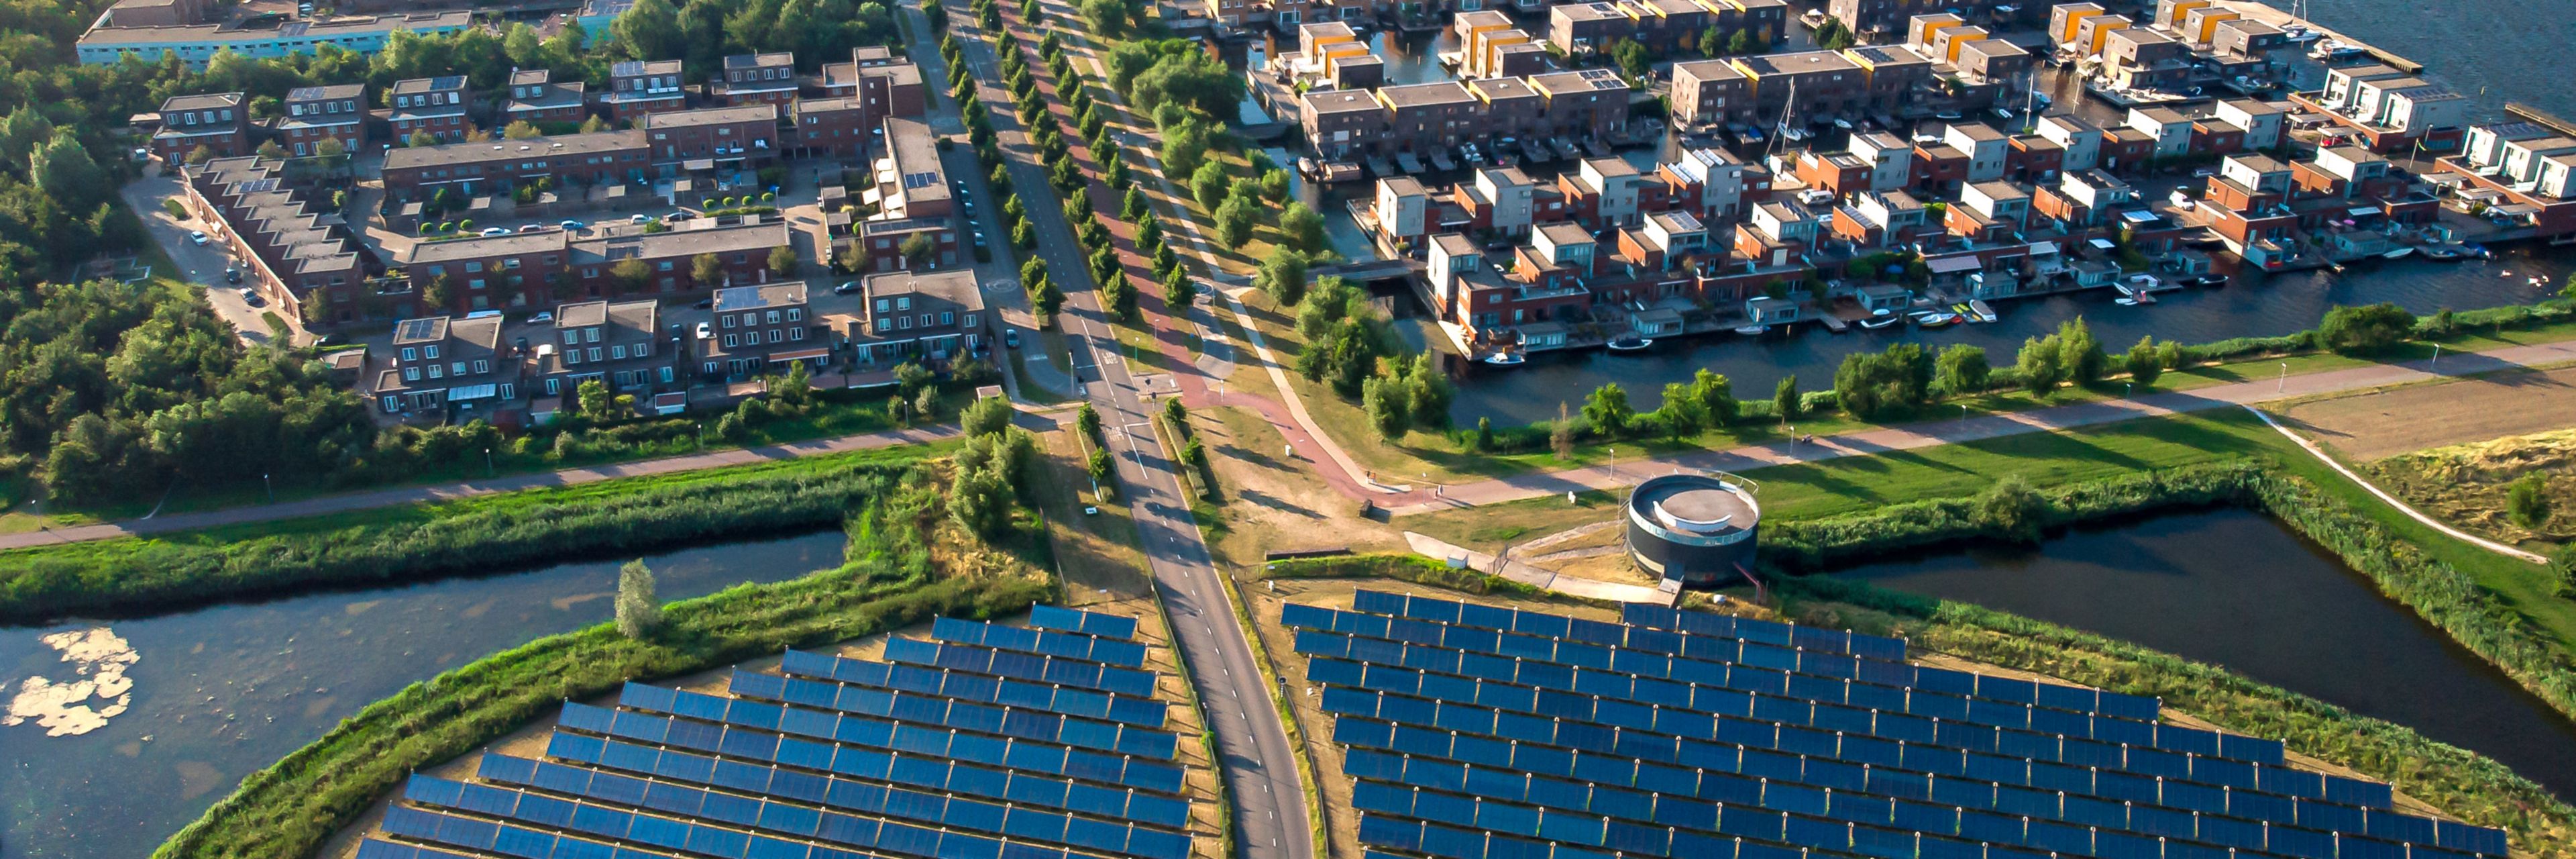 Modern sustainable neighbourhood in Almere, The Netherlands. The city heating (stadswarmte) in the district is partially powered by a solar panel island (Zoneiland). Aerial view.; Shutterstock ID 1522386716; purchase_order: -; job: -; client: -; other: -